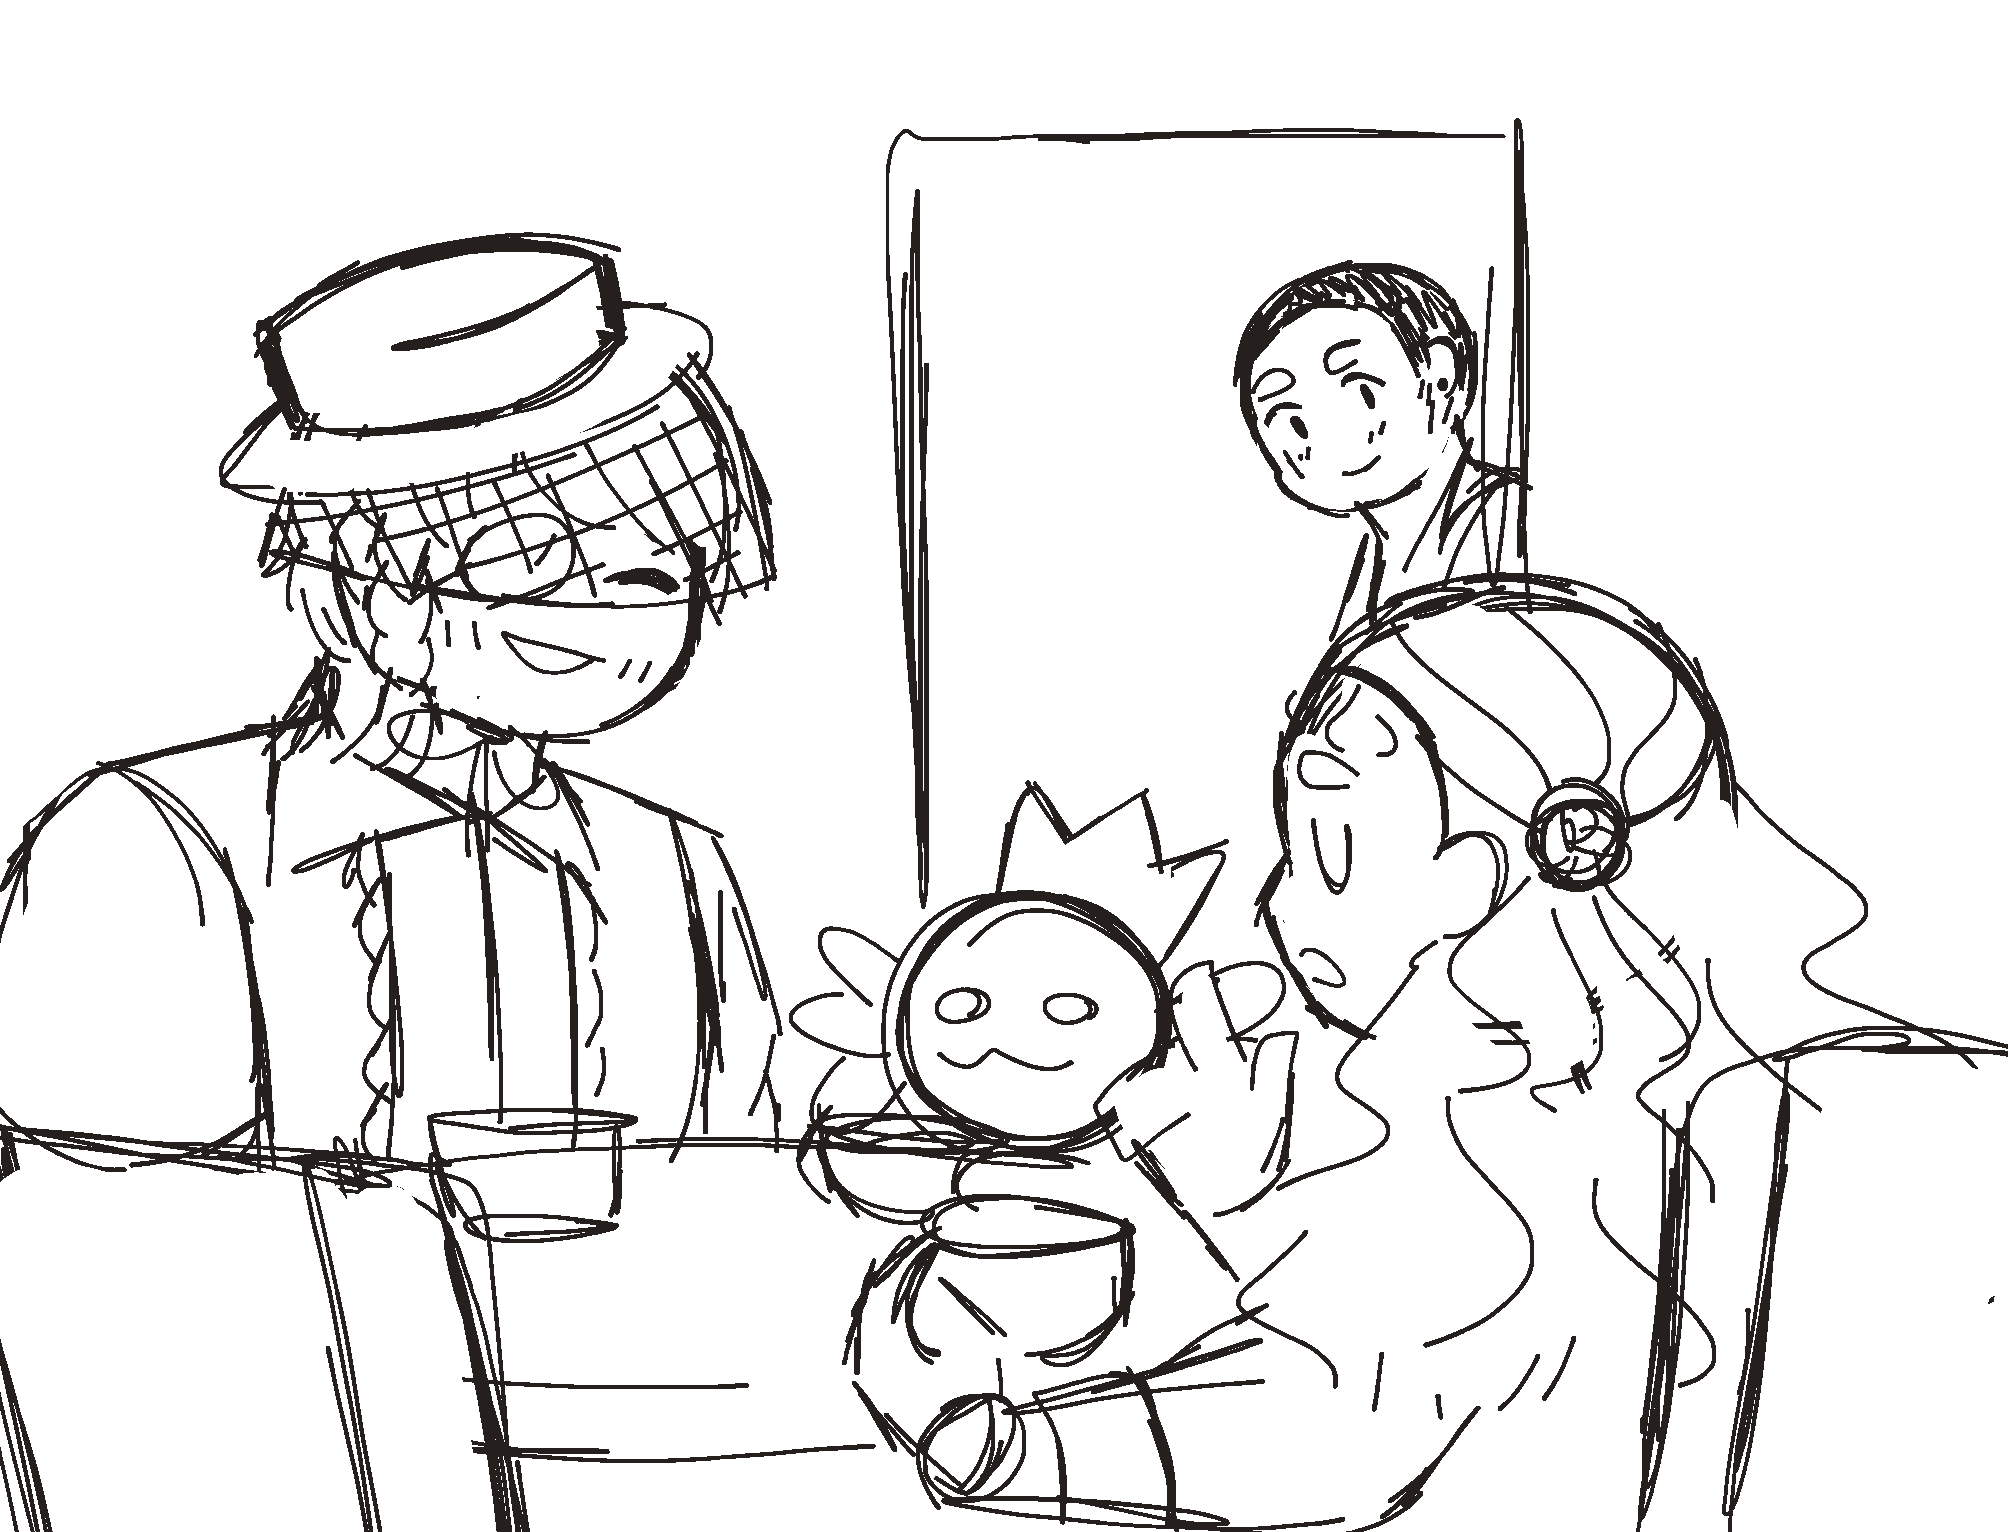 Spyros and Adeola have a tea party. A plush toy of an axolotl with a crown and cape sits in one of the chairs. Reiner is peaking from the door way, smiling.